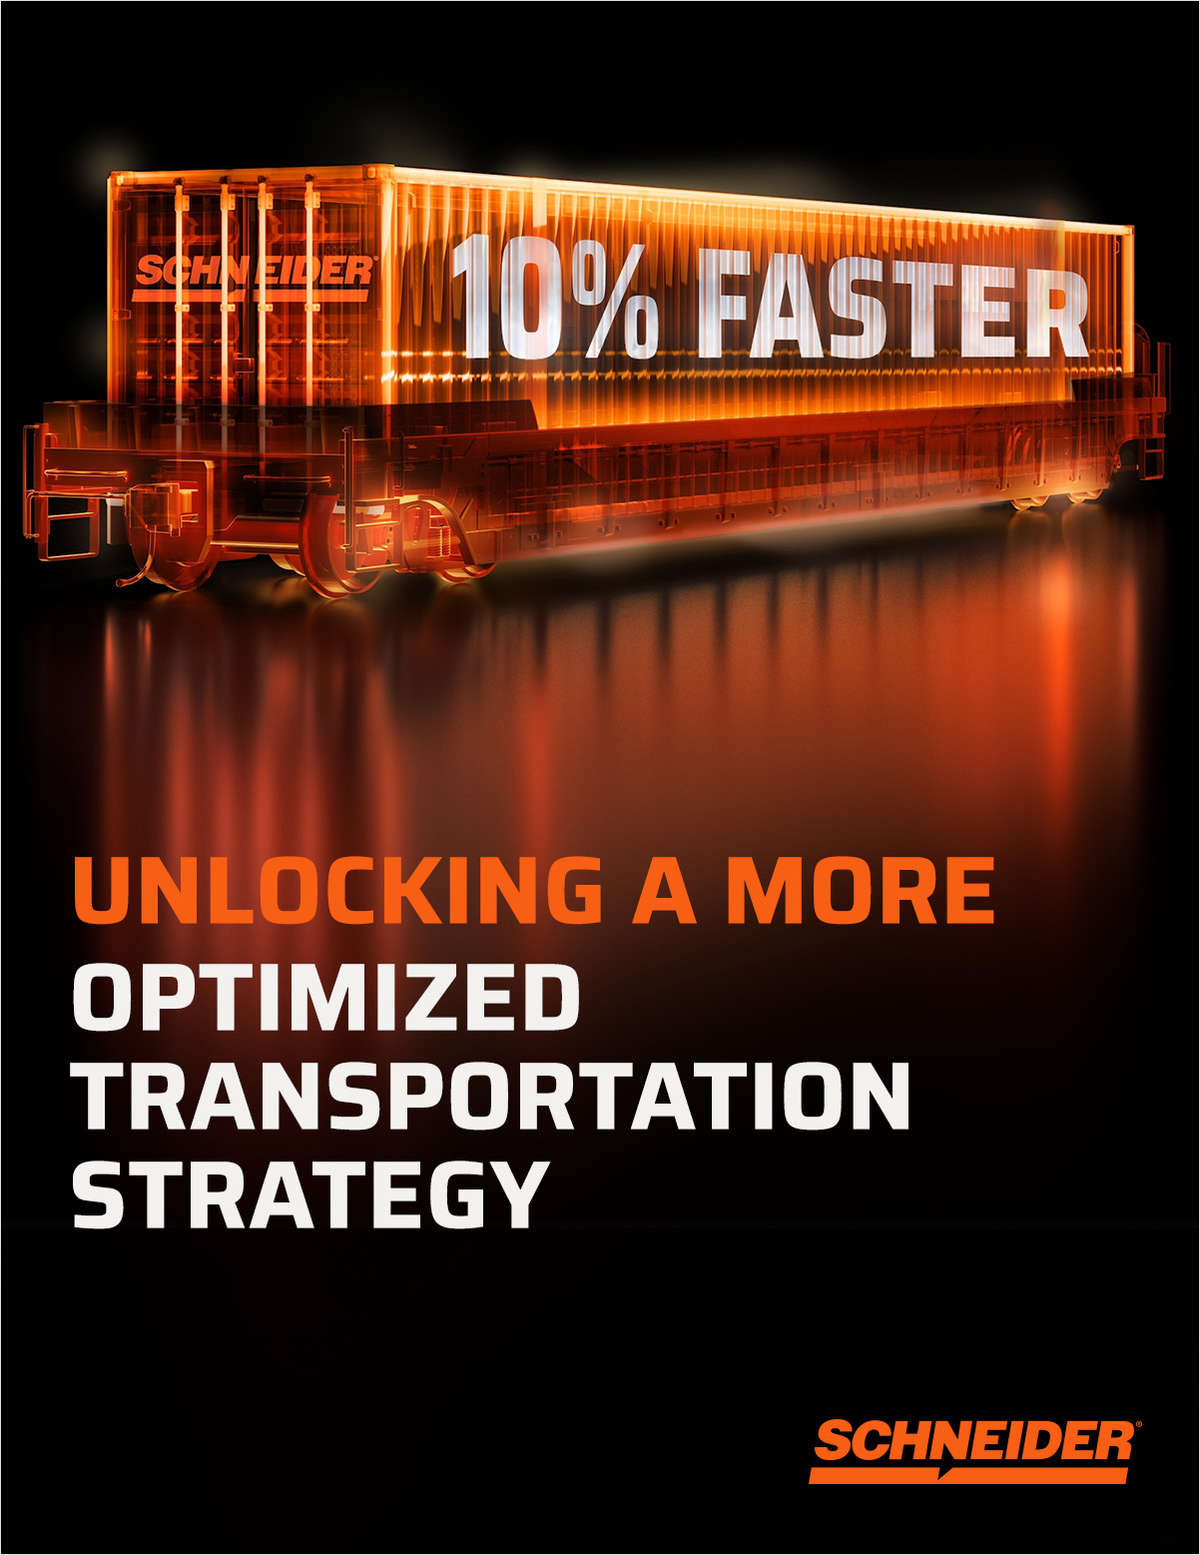 How to unlock a more optimized transportation strategy with intermodal